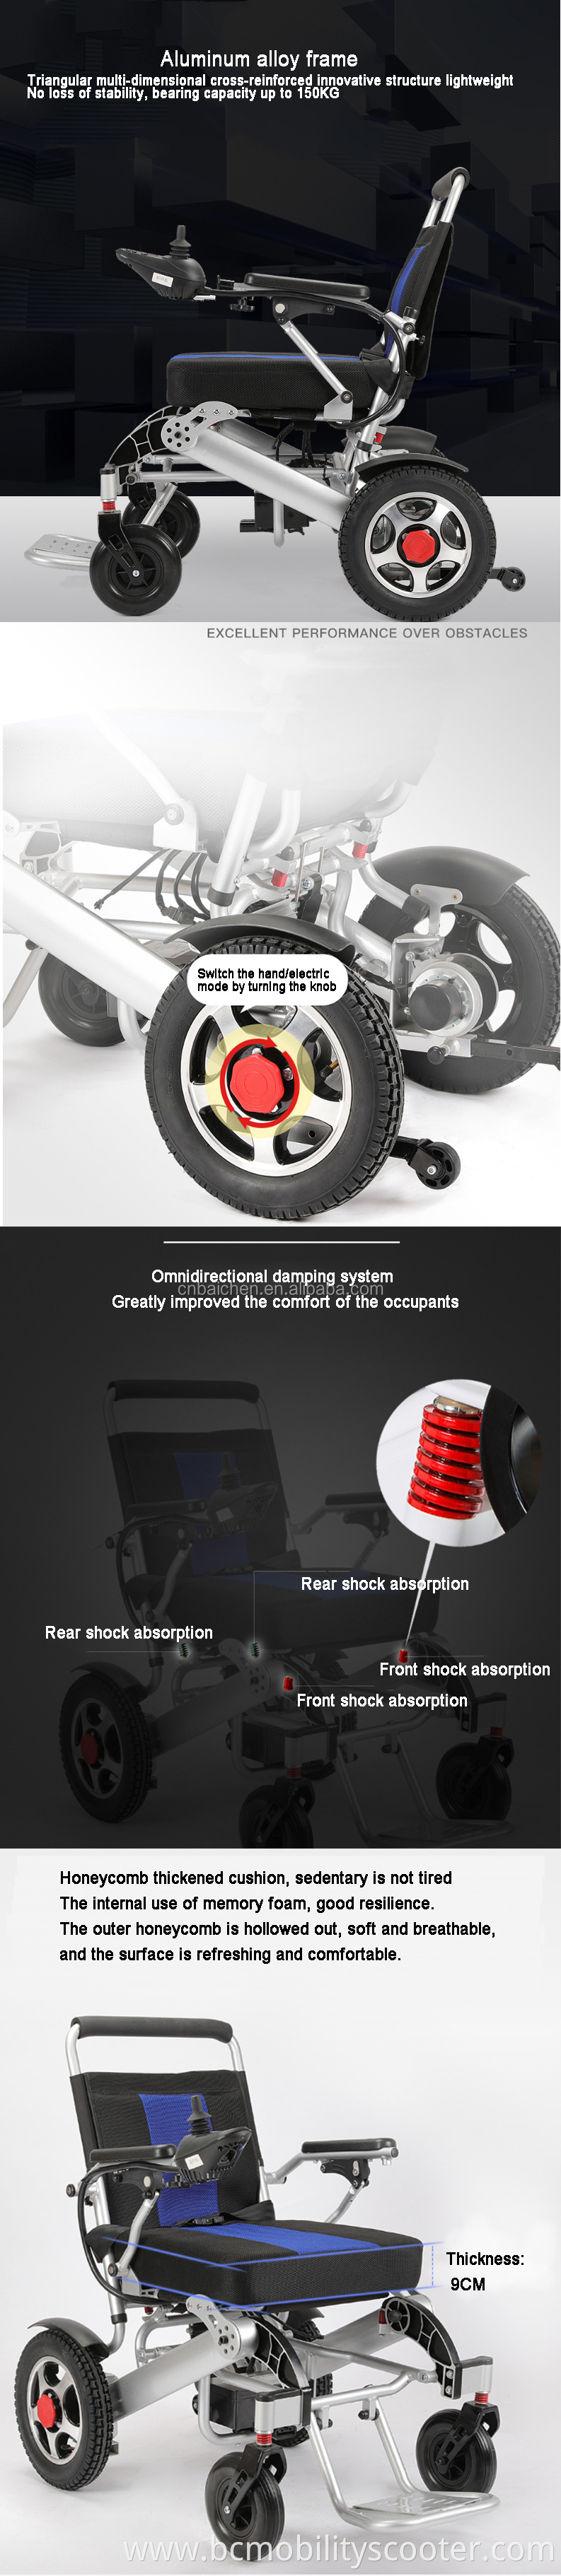 CE Approved 4x4 electric wheelchair with gps tracker price of wheelchair philippines